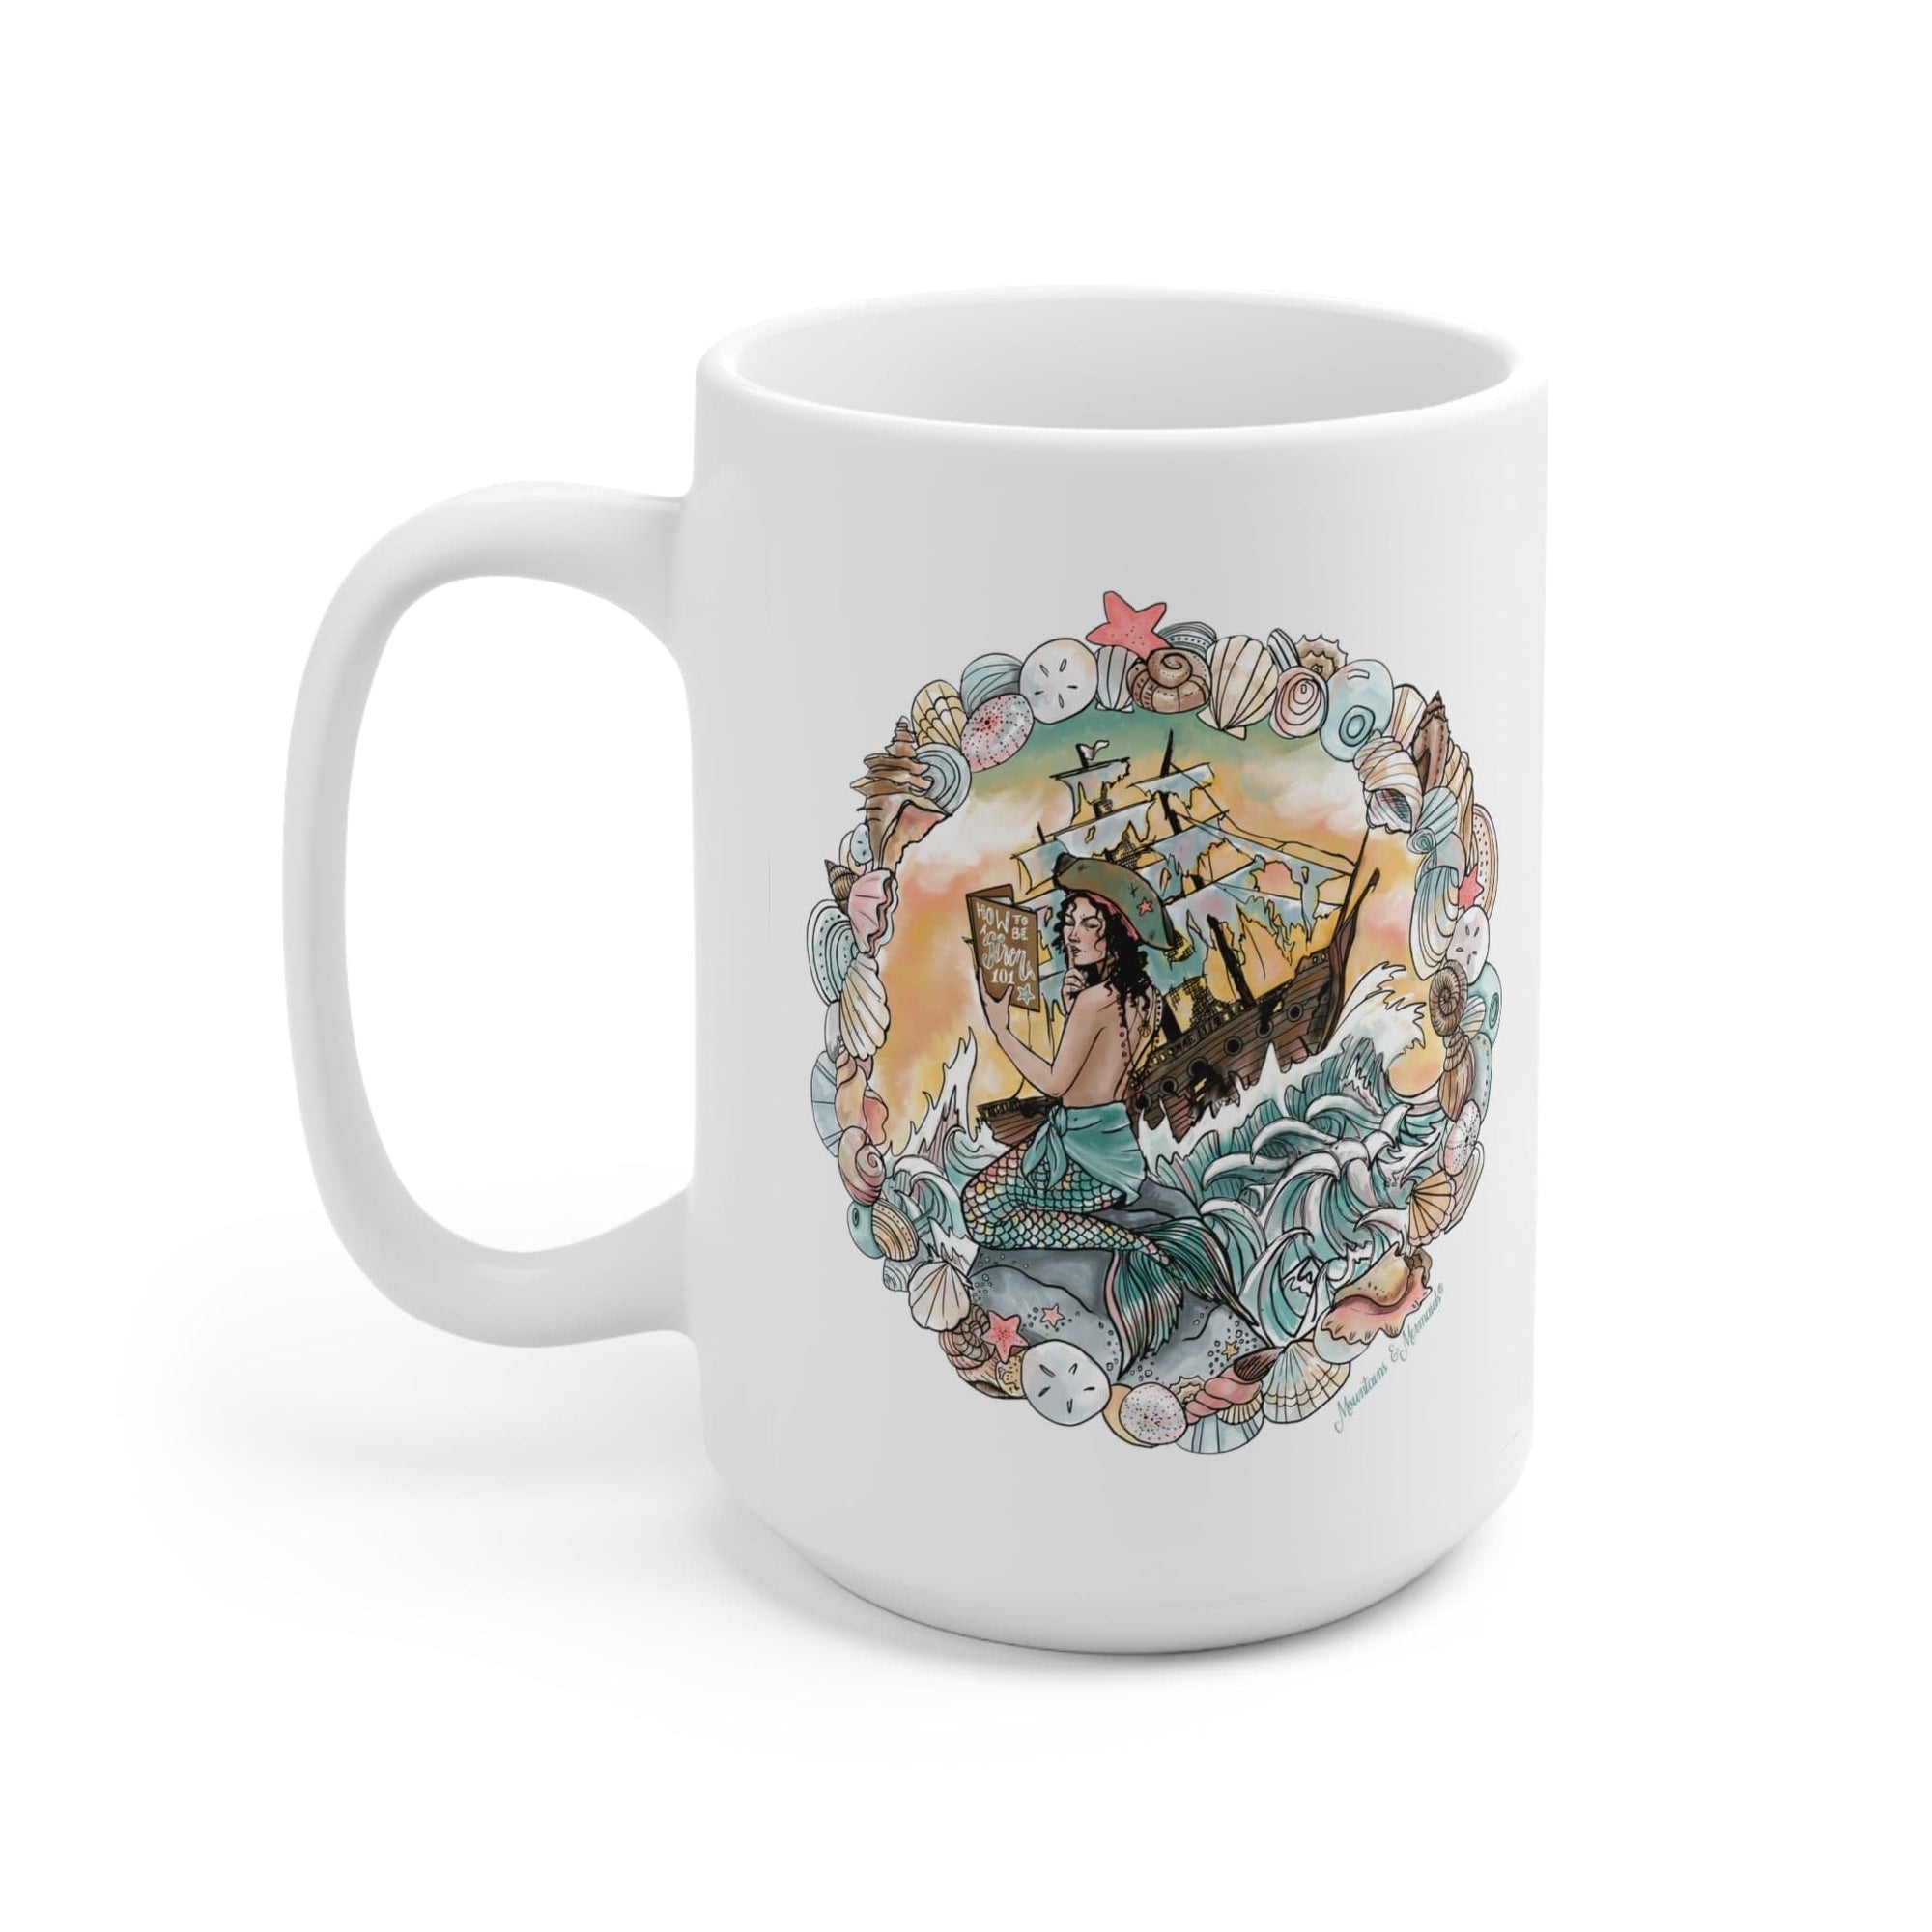 How To Be A Siren 101 Reimagined Coffee Mug 15oz - Mountains & Mermaids